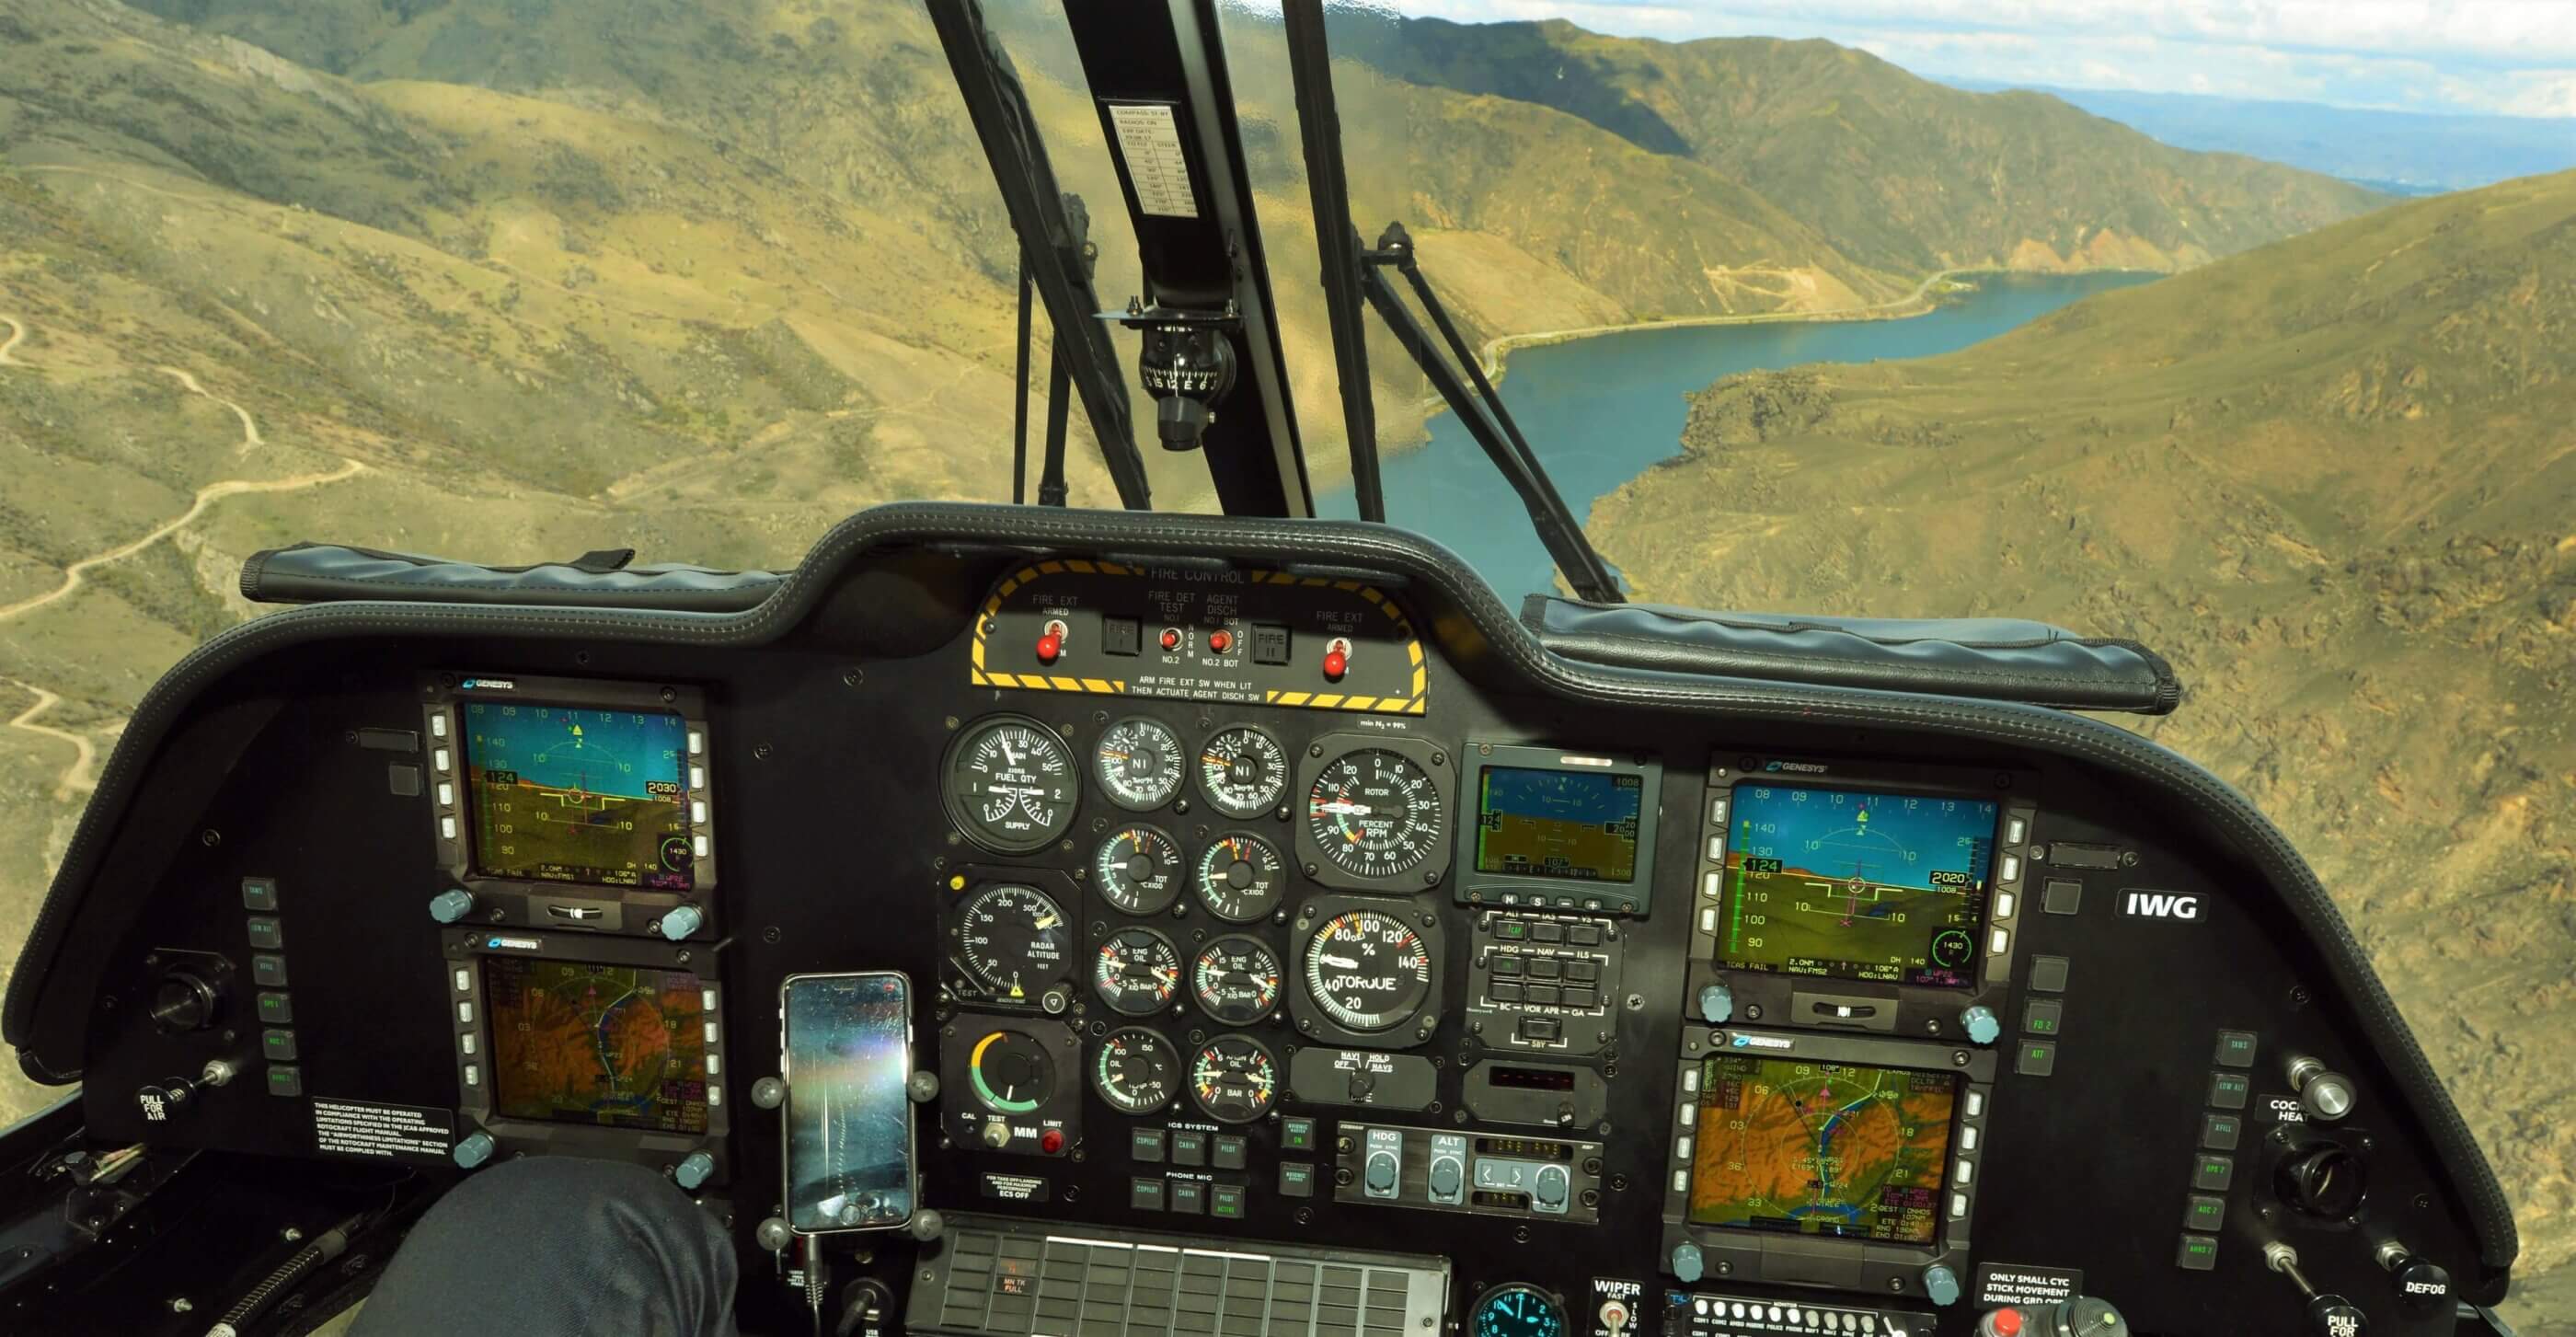 The electronic flight instrumentation system provides customers with a multi-mission instrument flight rules helicopter capable of operating in today’s complex air traffic environment. Airwork Photo